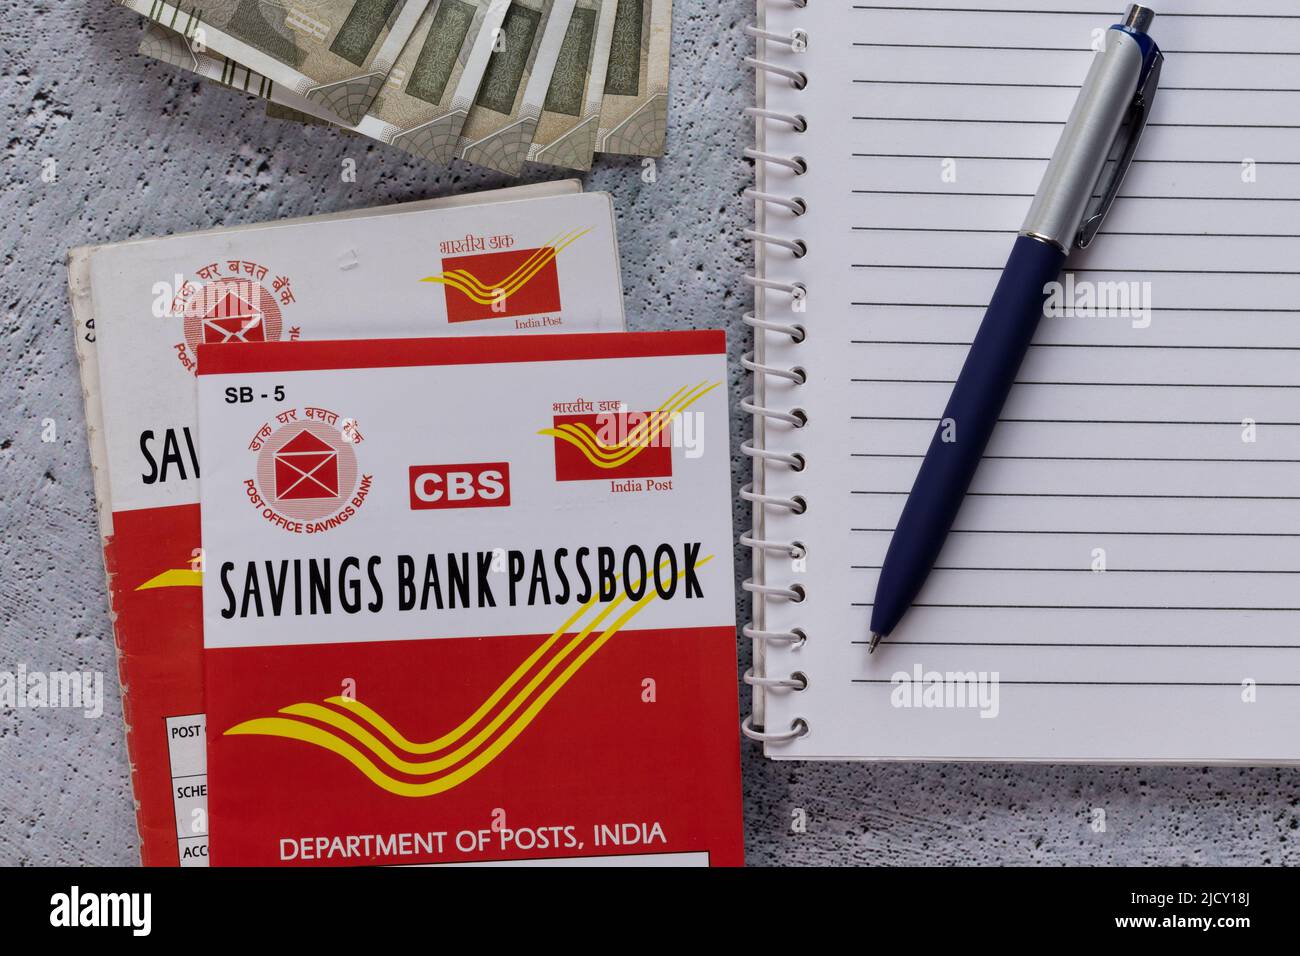 Birbhum, West Bengal, India - 25 April 2022: Top view of Indian post office savings books, currencies, pen and note book Stock Photo